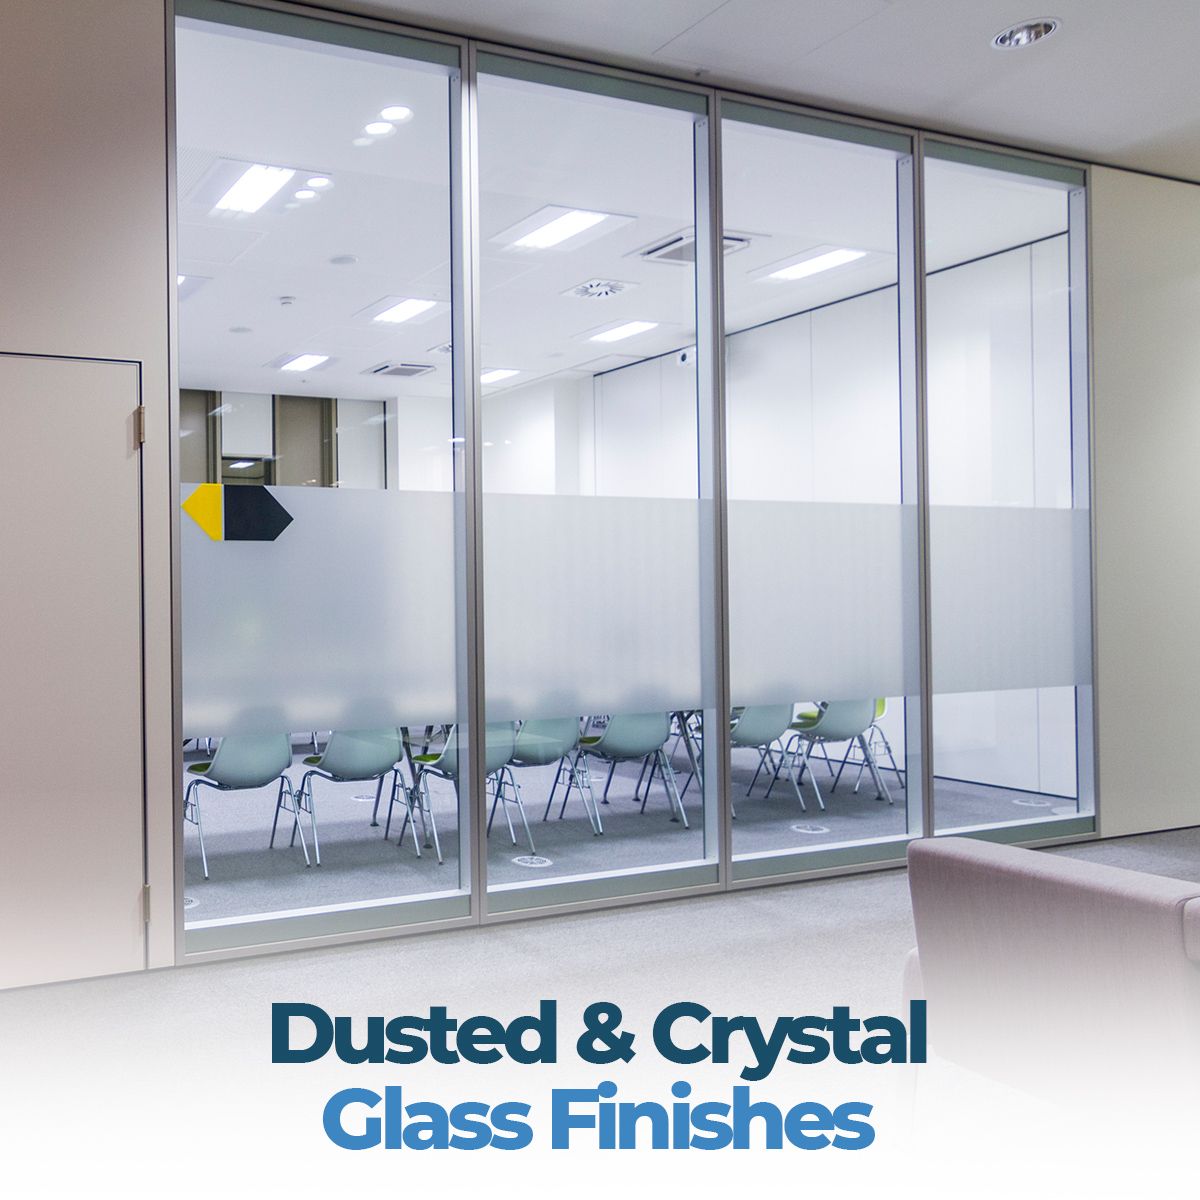 Dusted & Crystal Glass Finishes